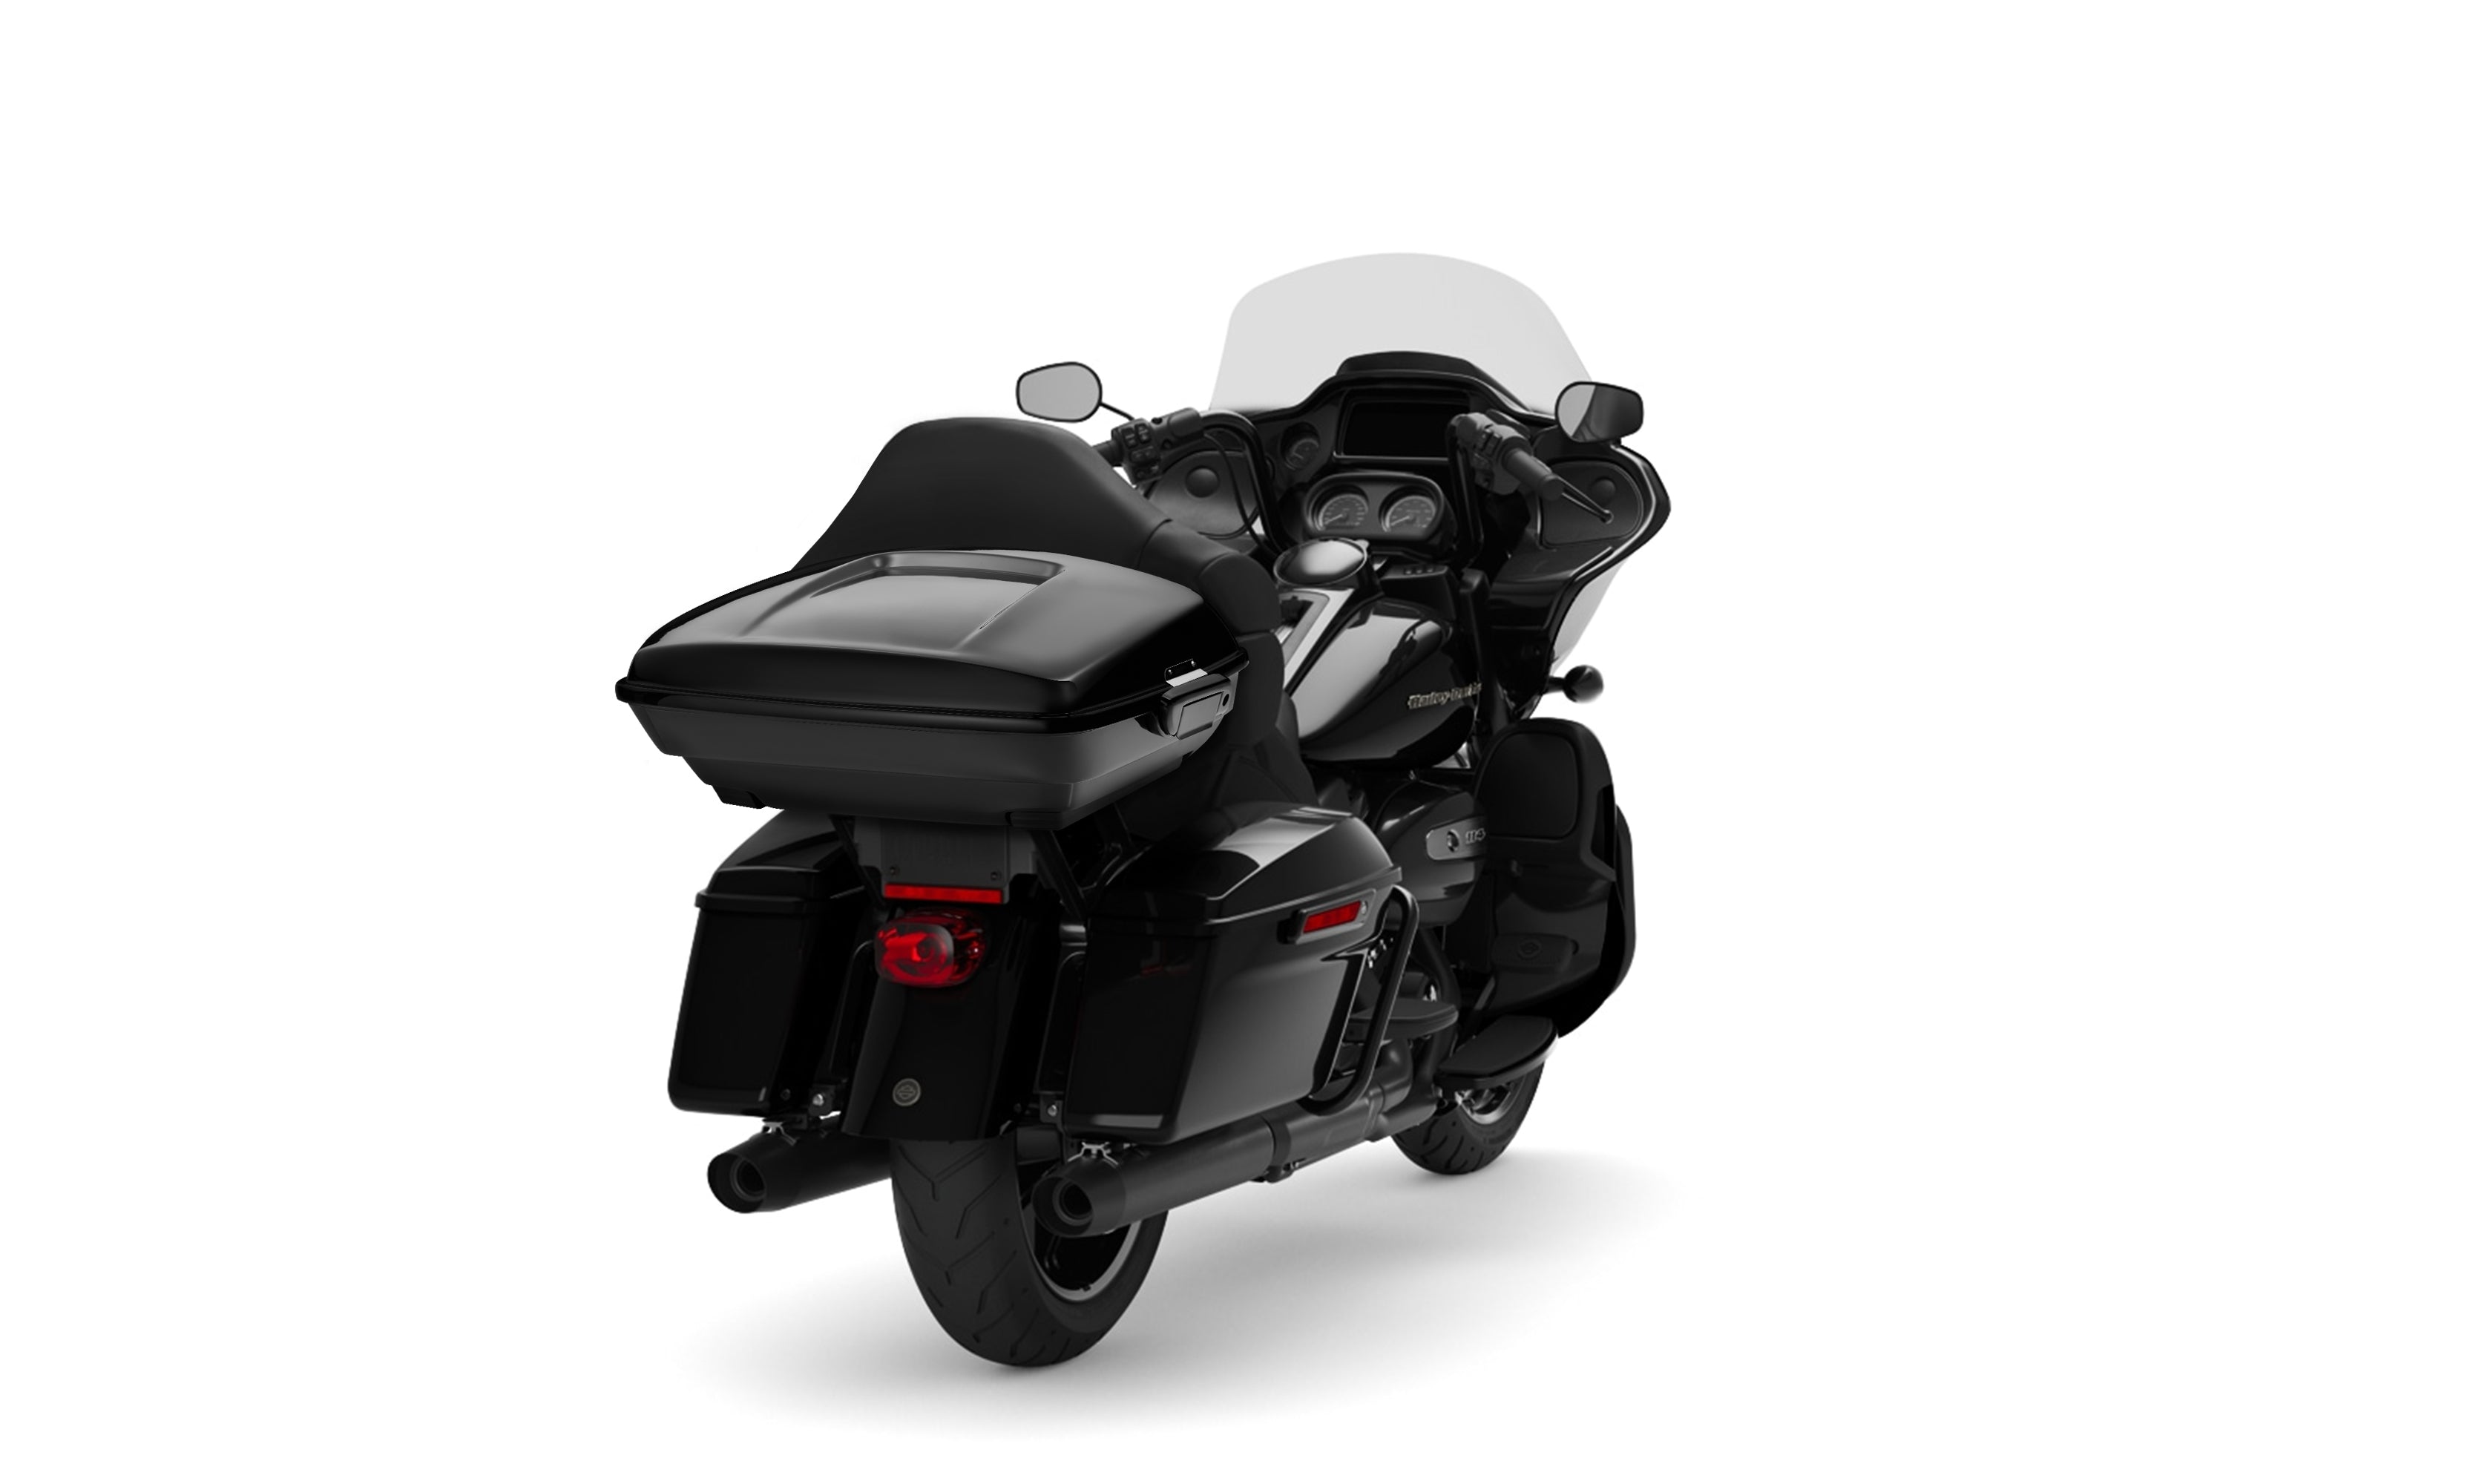 Viking Voyage Extra Large Chopped Tour Pack for Harley Street Glide Bag on Bike View @expand